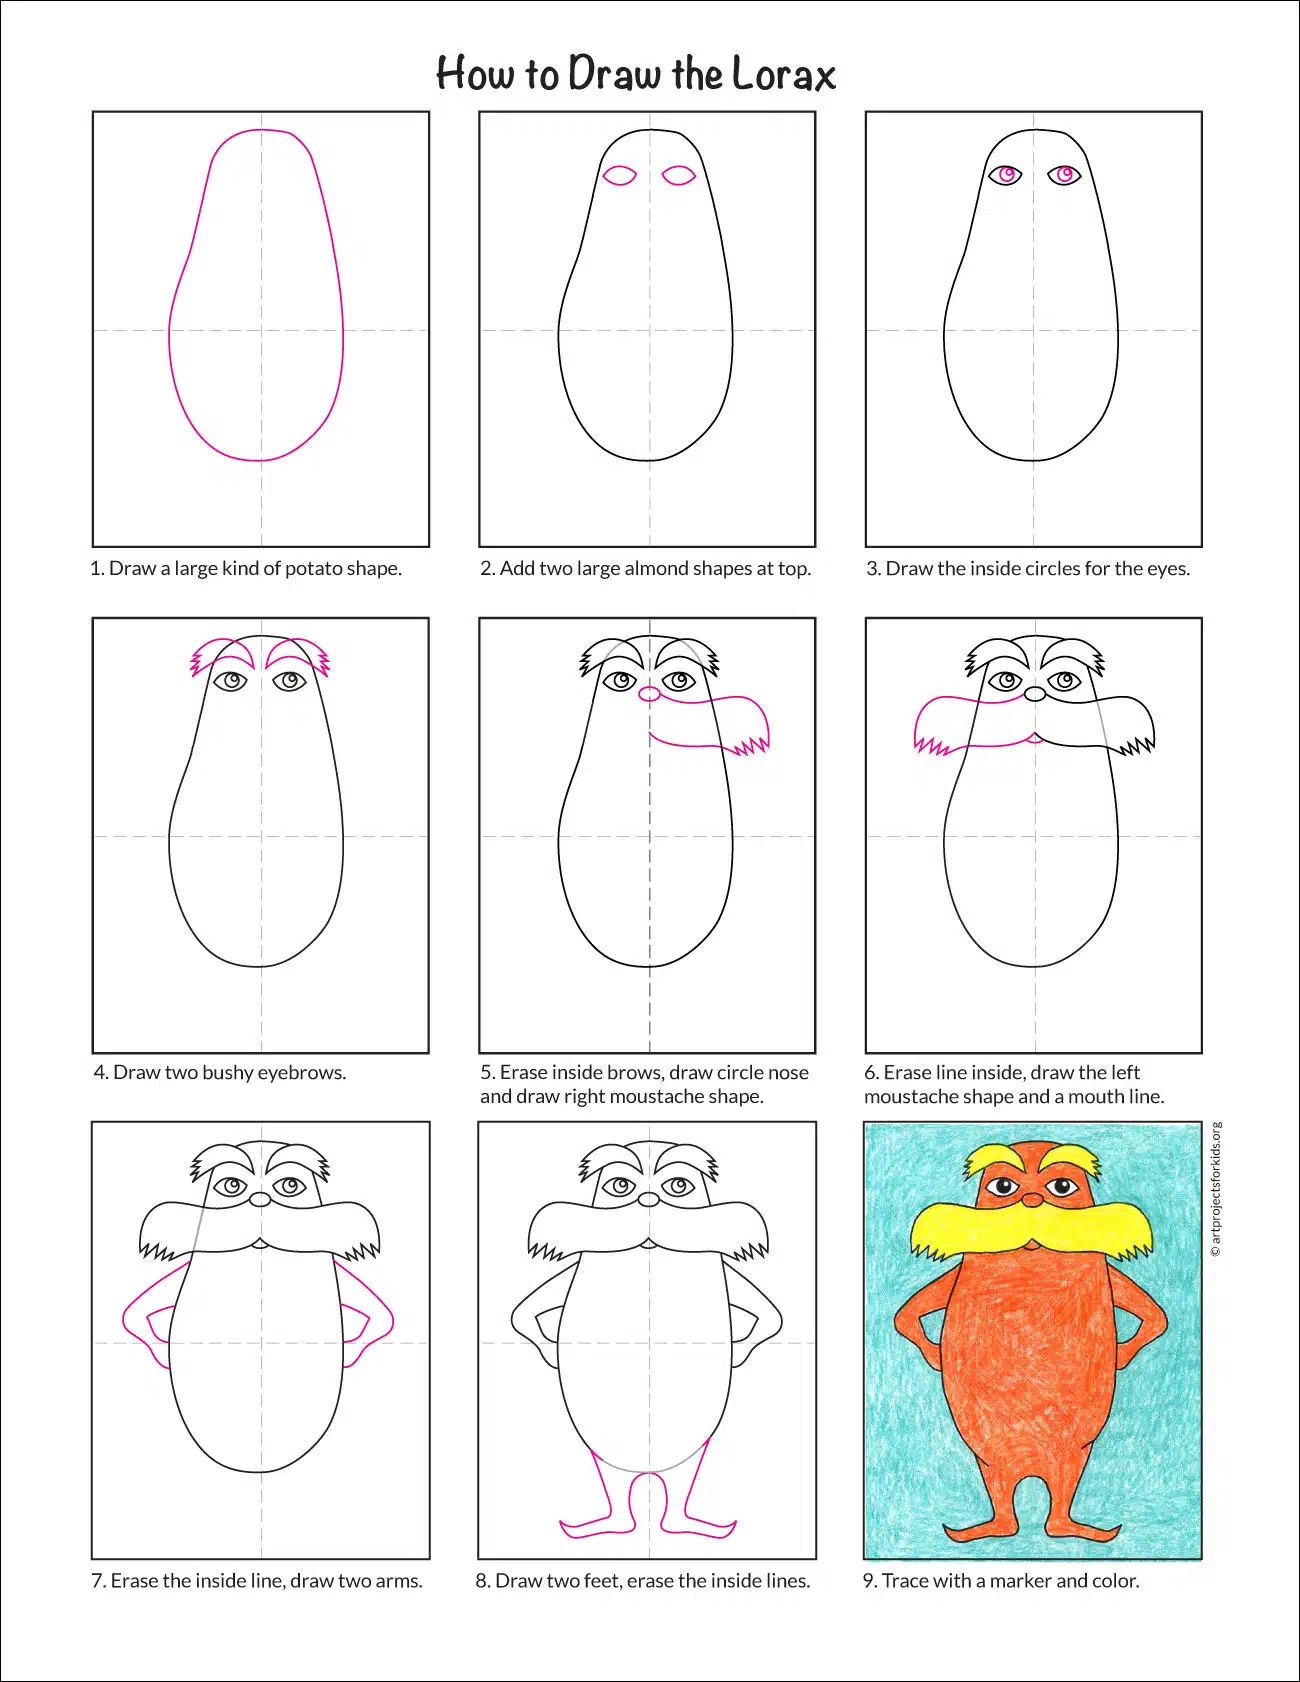 How to draw the Lorax diagram.jpg — Activity Craft Holidays, Kids, Tips